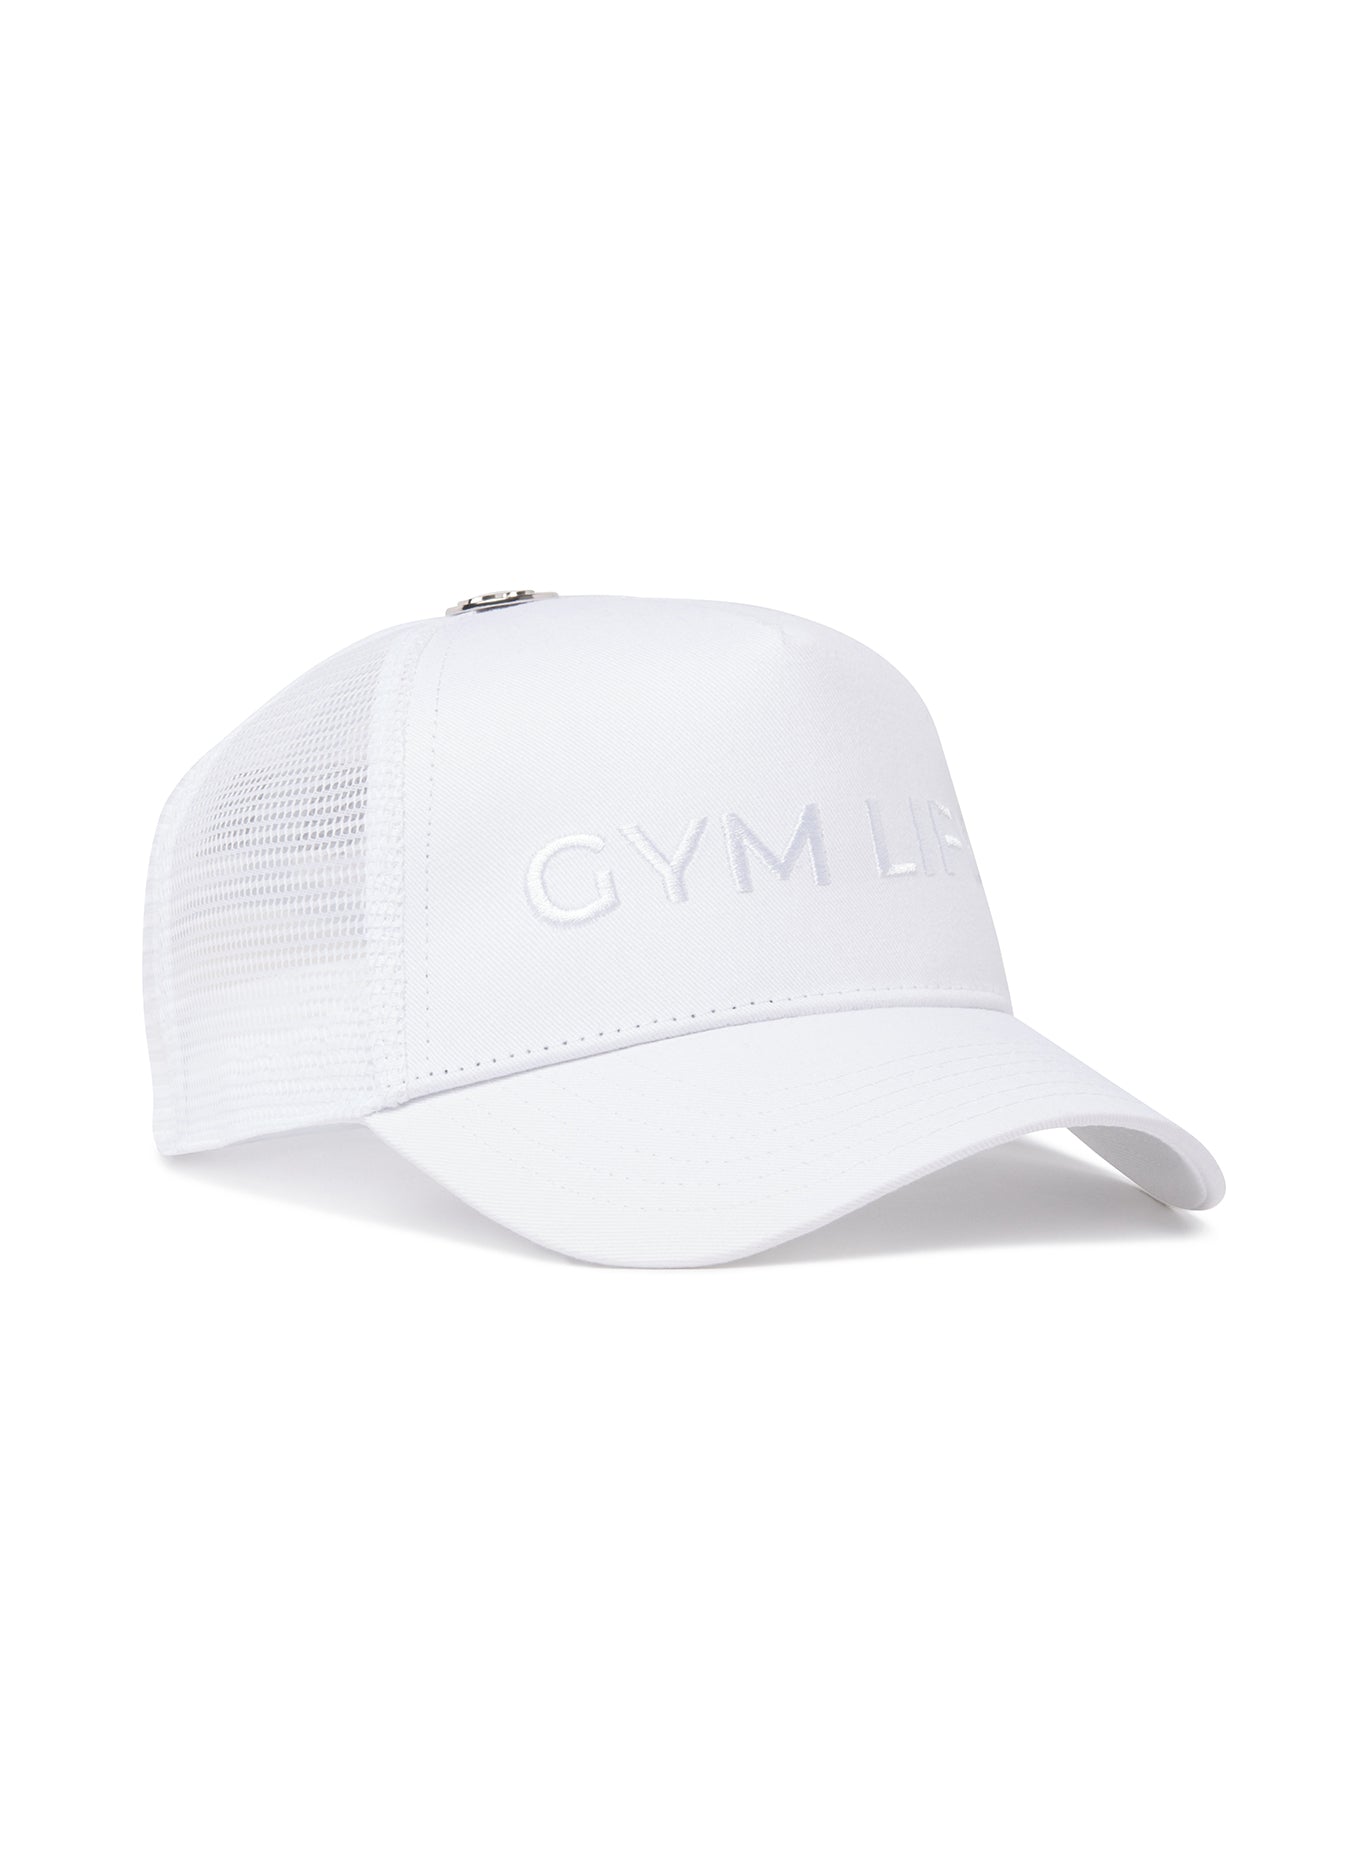 Right side view of our gym life hat 